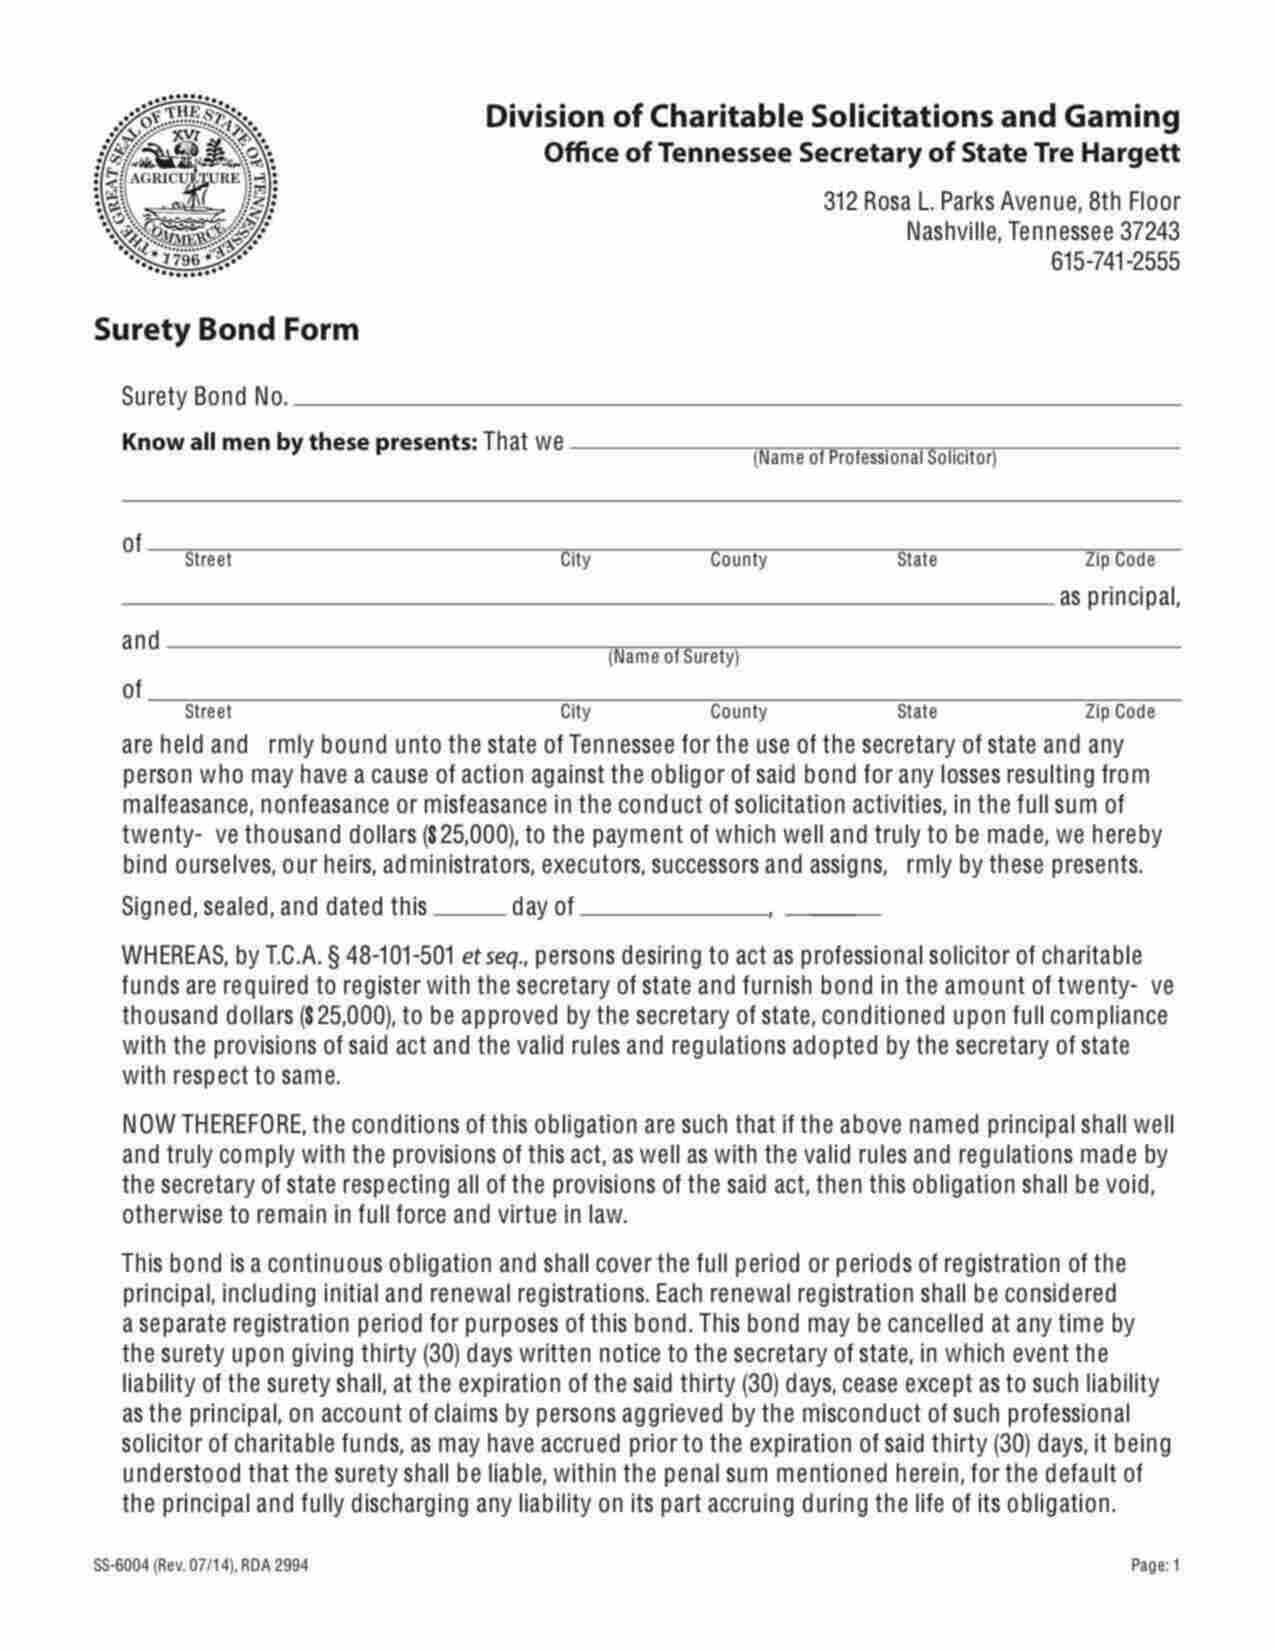 Tennessee Professional Solicitor Bond Form